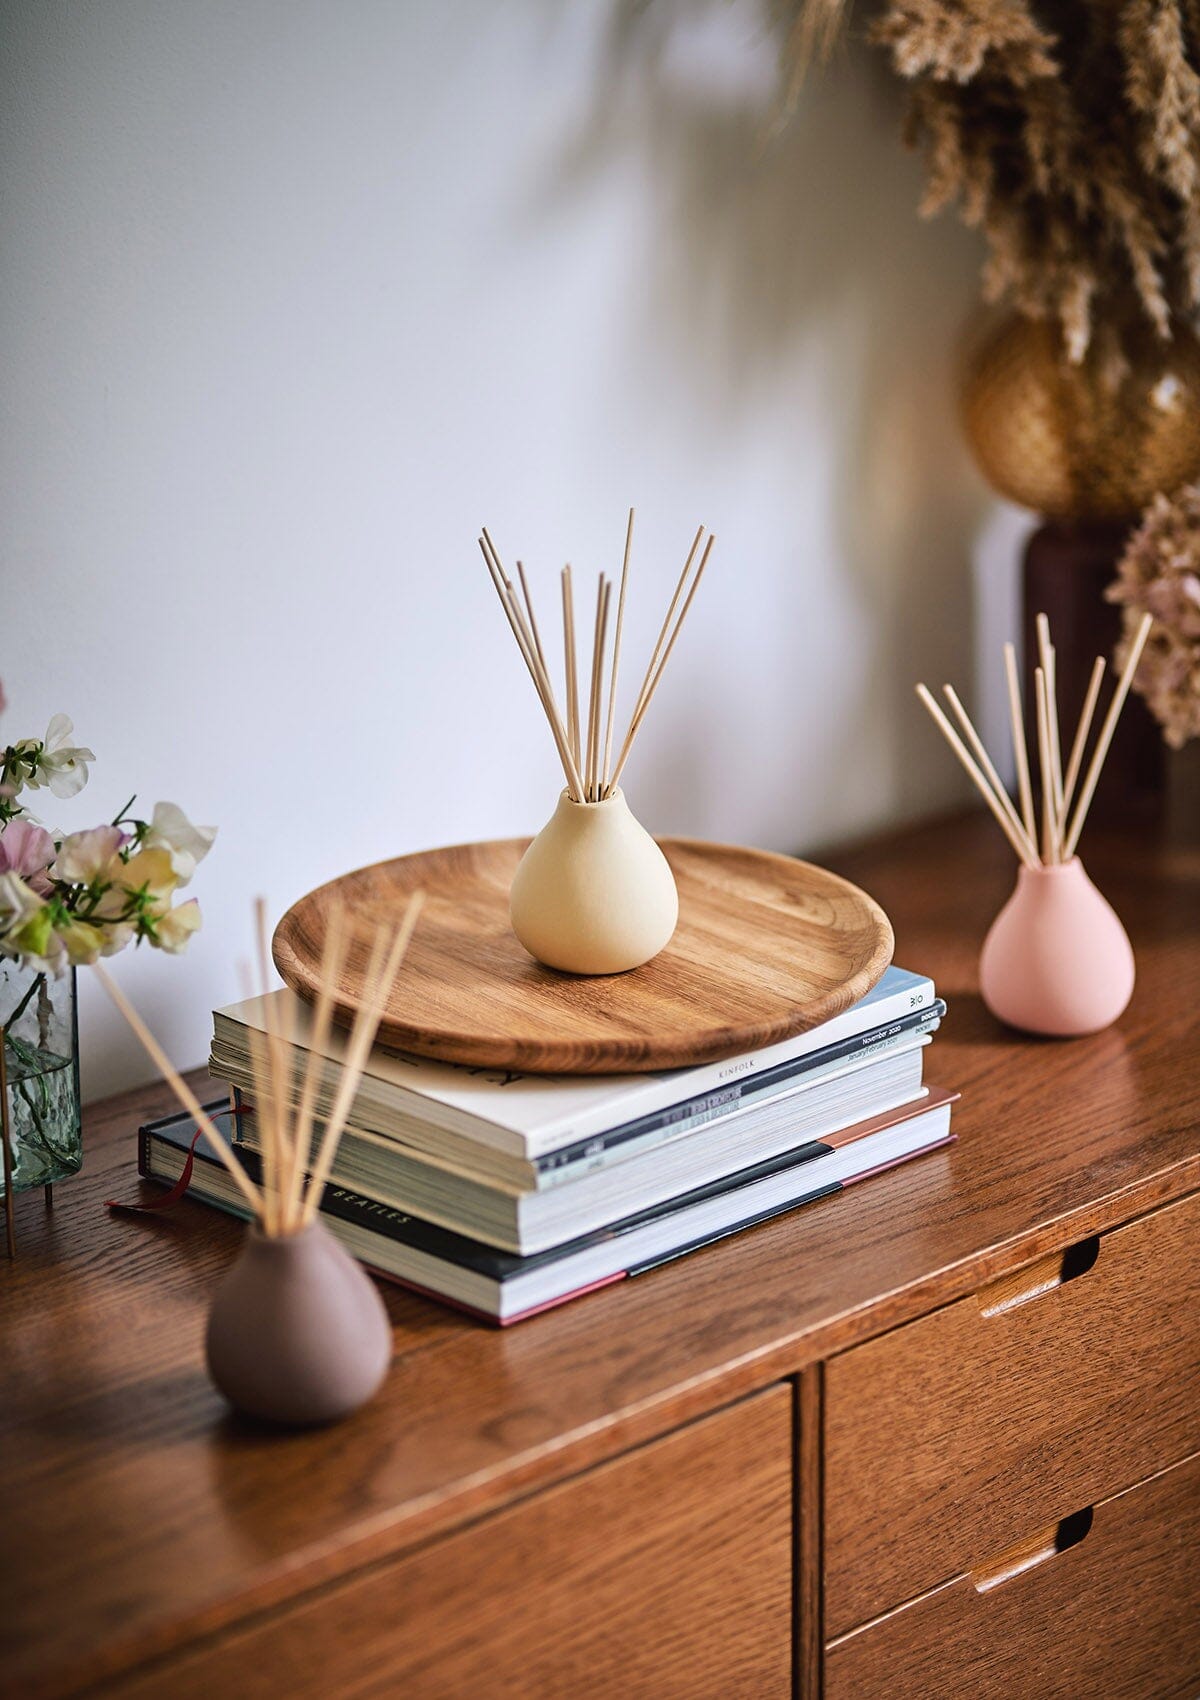 Cream Himalayan Diffuser by Aery displayed on pile of books on wooden shelf with vase of flowers 